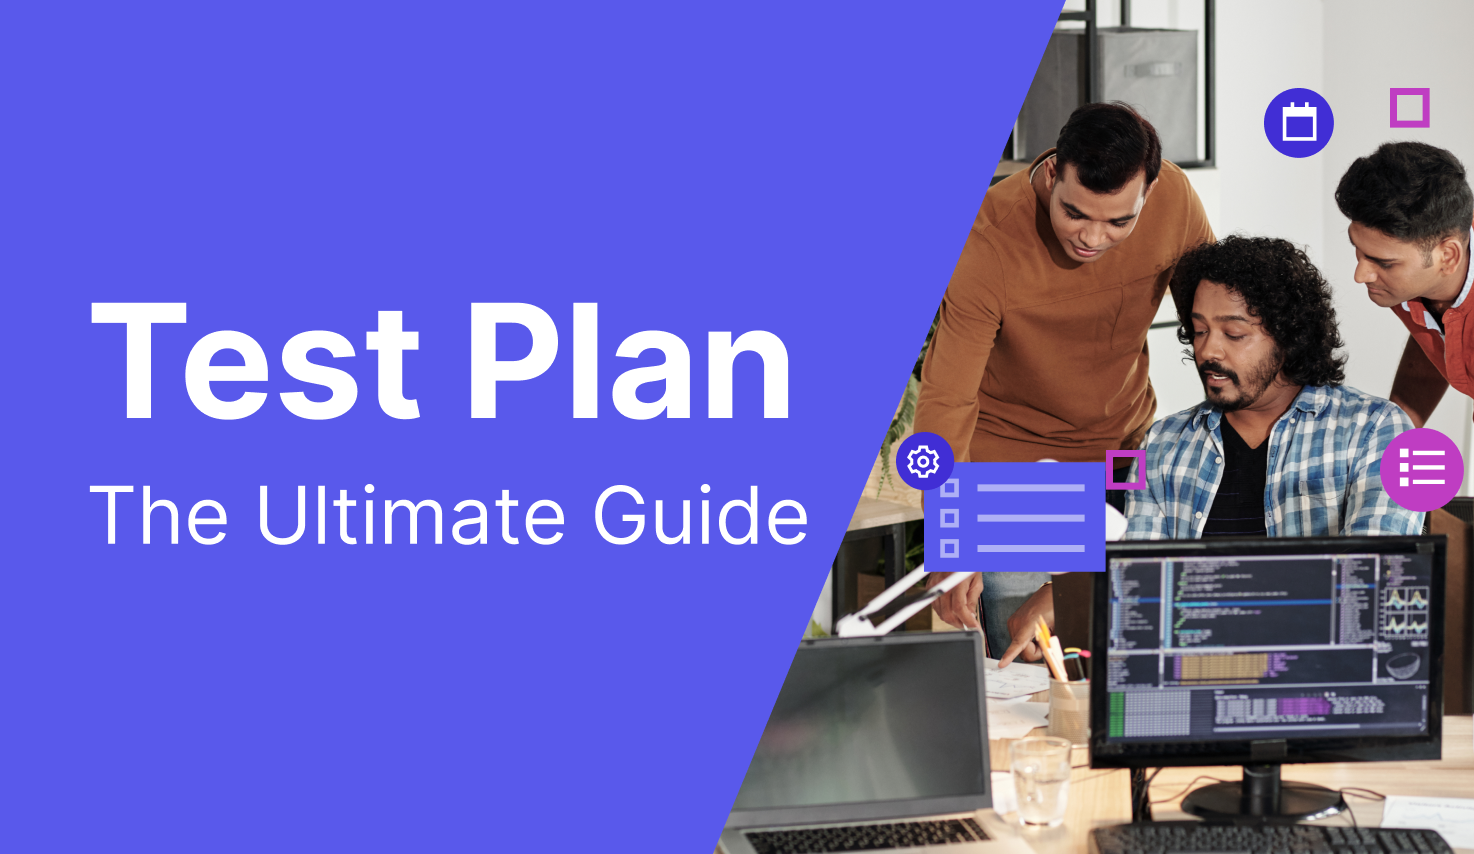 Test Plan The Ultimate Guide feature image